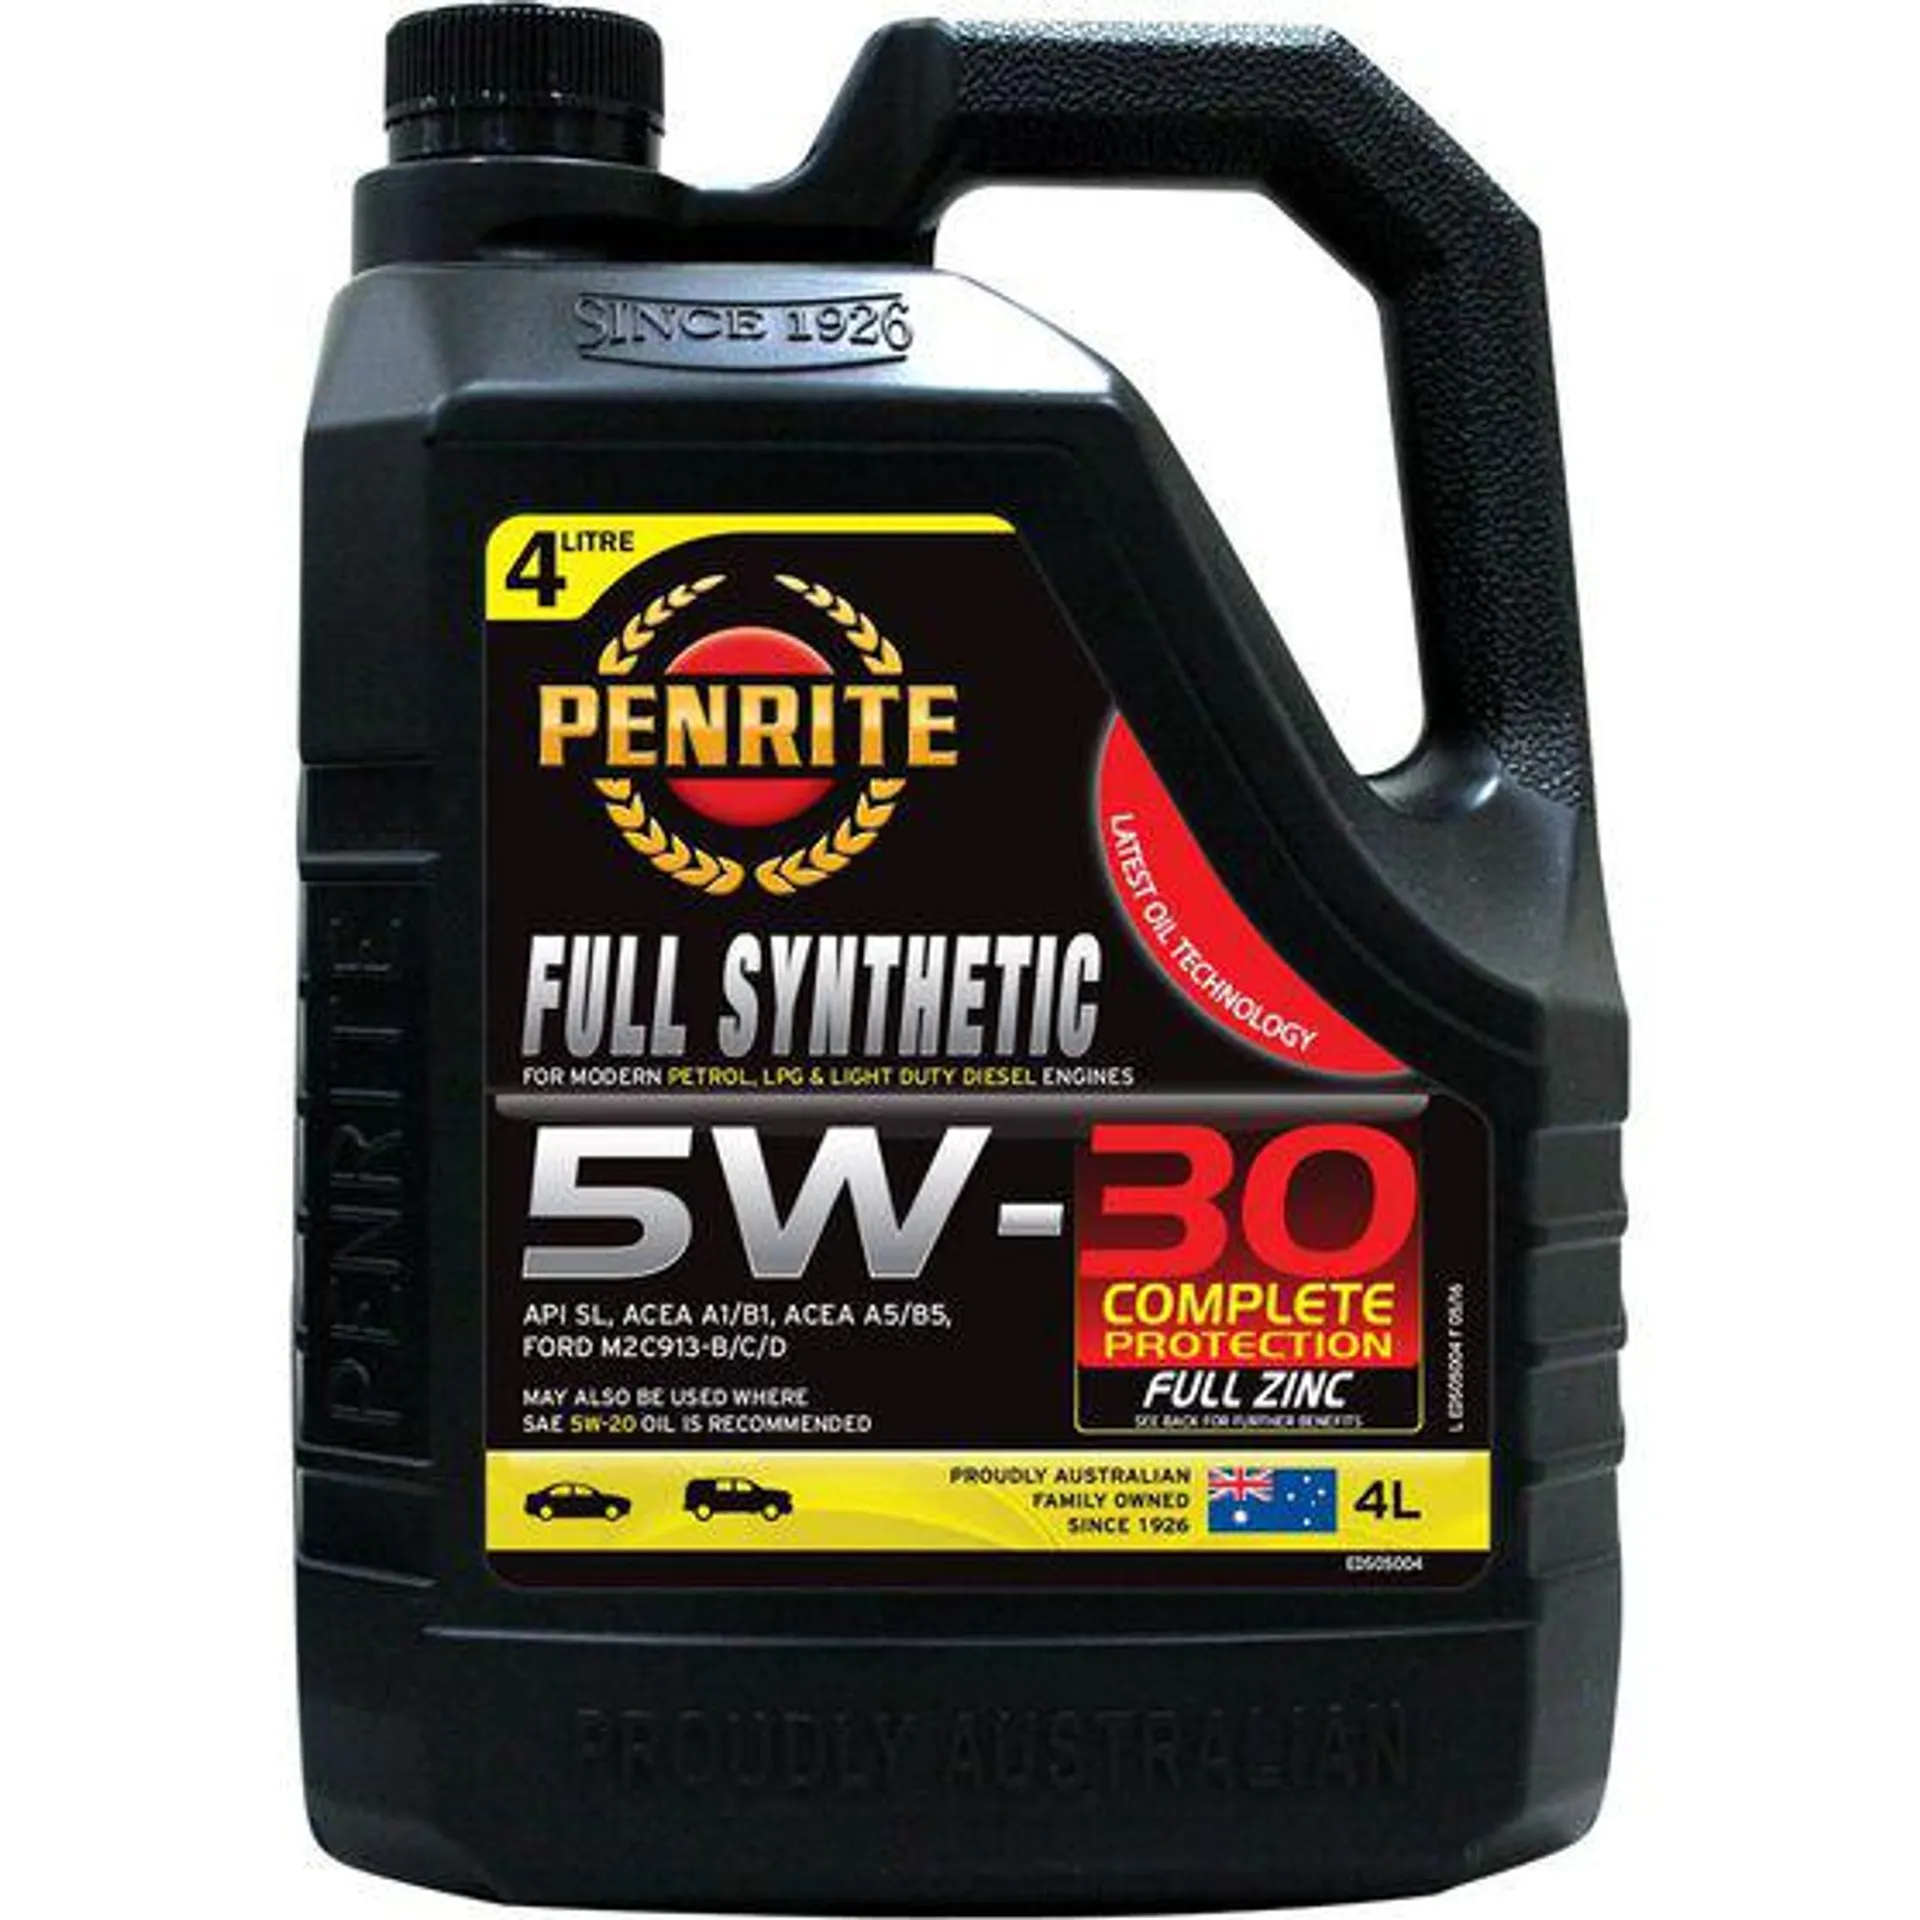 Penrite Full Synthetic Engine Oil - 5W-30 4 Litre